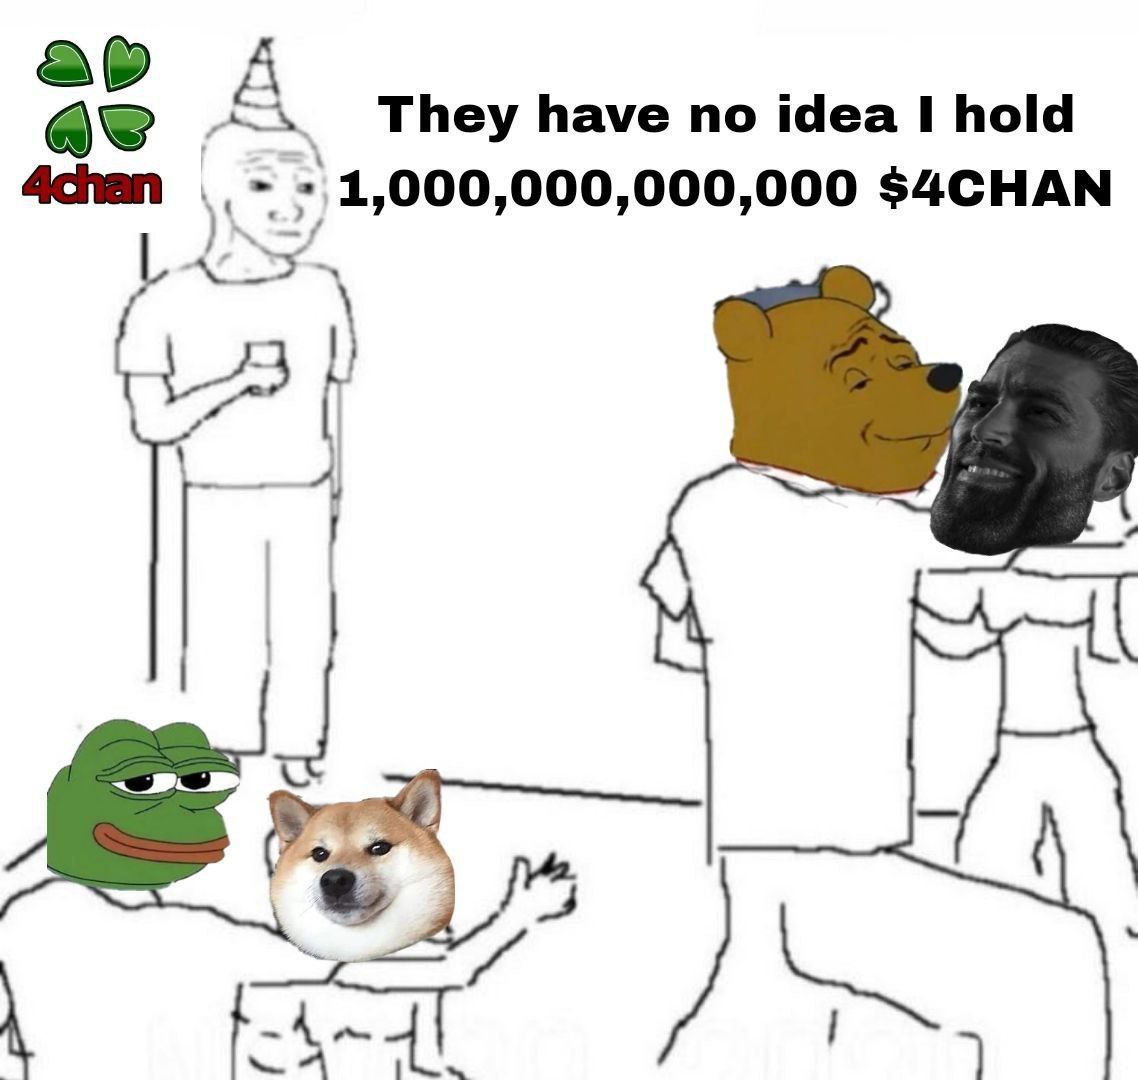 I’m going to say this and remember i told you this we are going to a Billion #4chan #4chantoken #4chanmovement you have a golden opportunity here i hope you take it 💎 #cryptocurrency #CryptocurrencyNews   spread the word i  wanna hear in the  bull run #4chan changed your life🍀